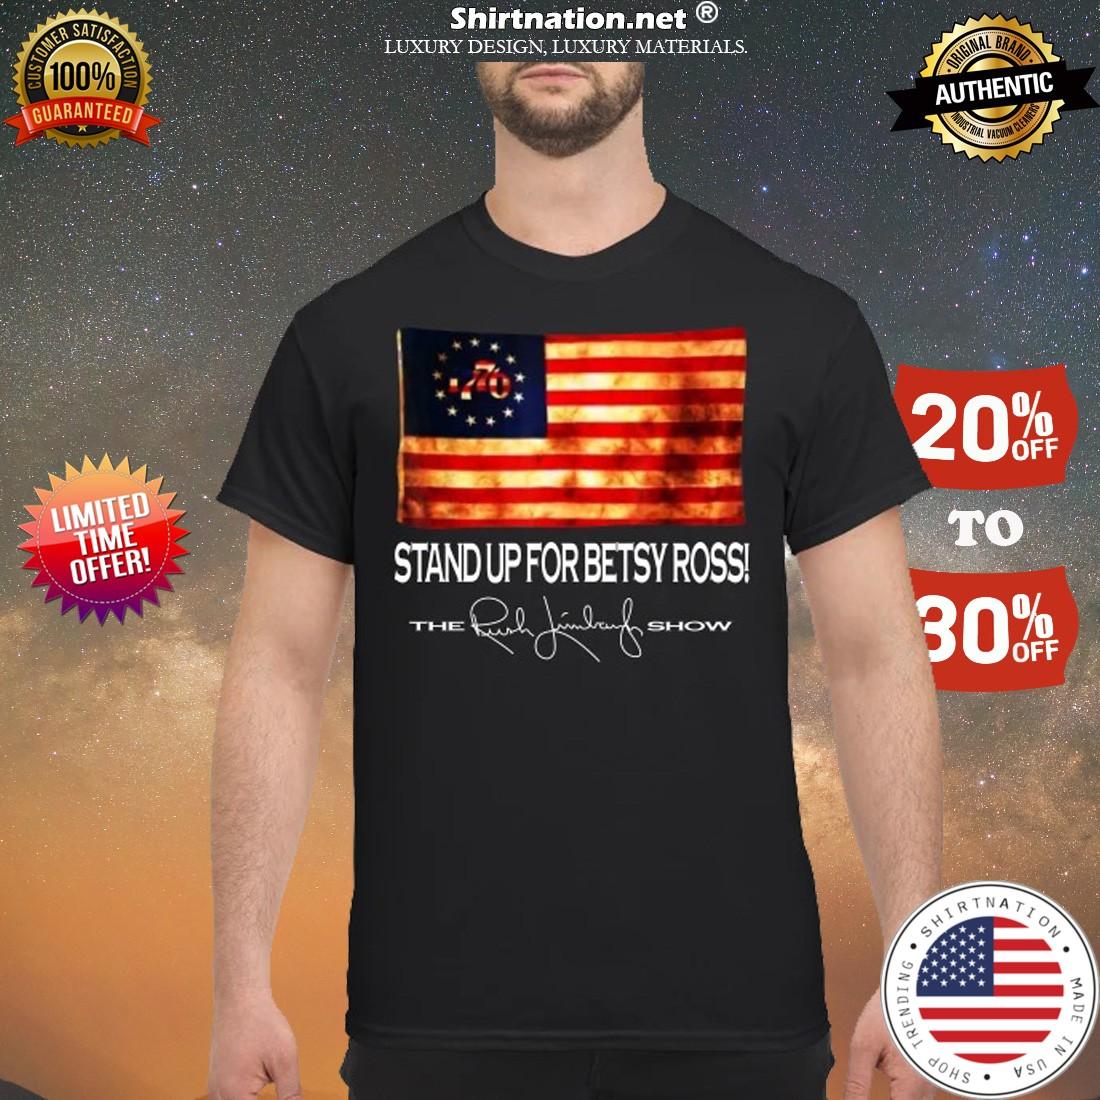 Stand up for Betsy Ross the Rush Limbaugh show shirt